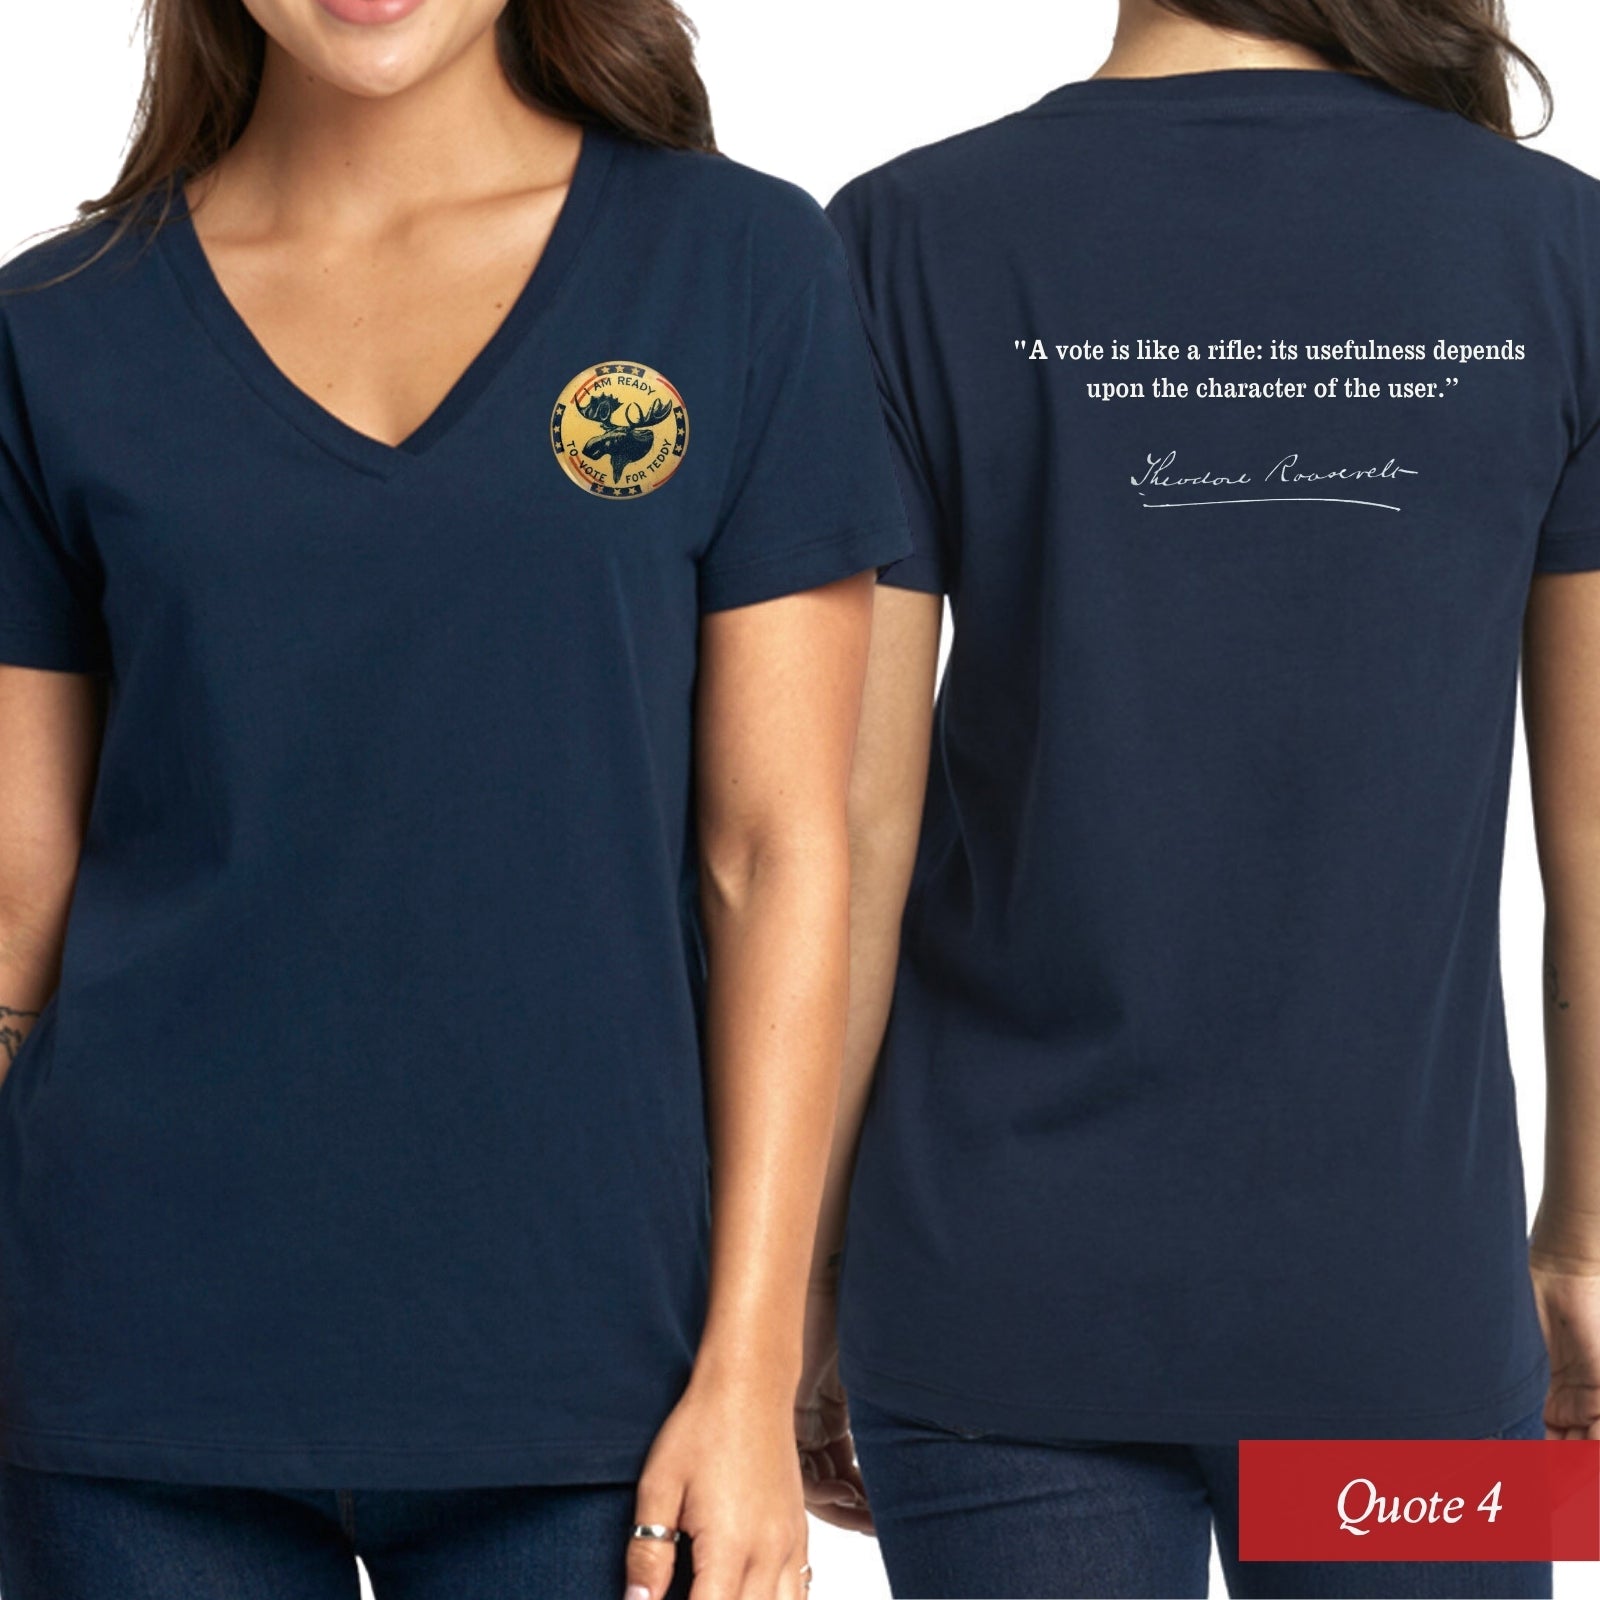 Quote 4 of the Teddy Roosevelt “I’m ready to vote for Teddy” presidential campaign Women's v-neck shirt from The History List store